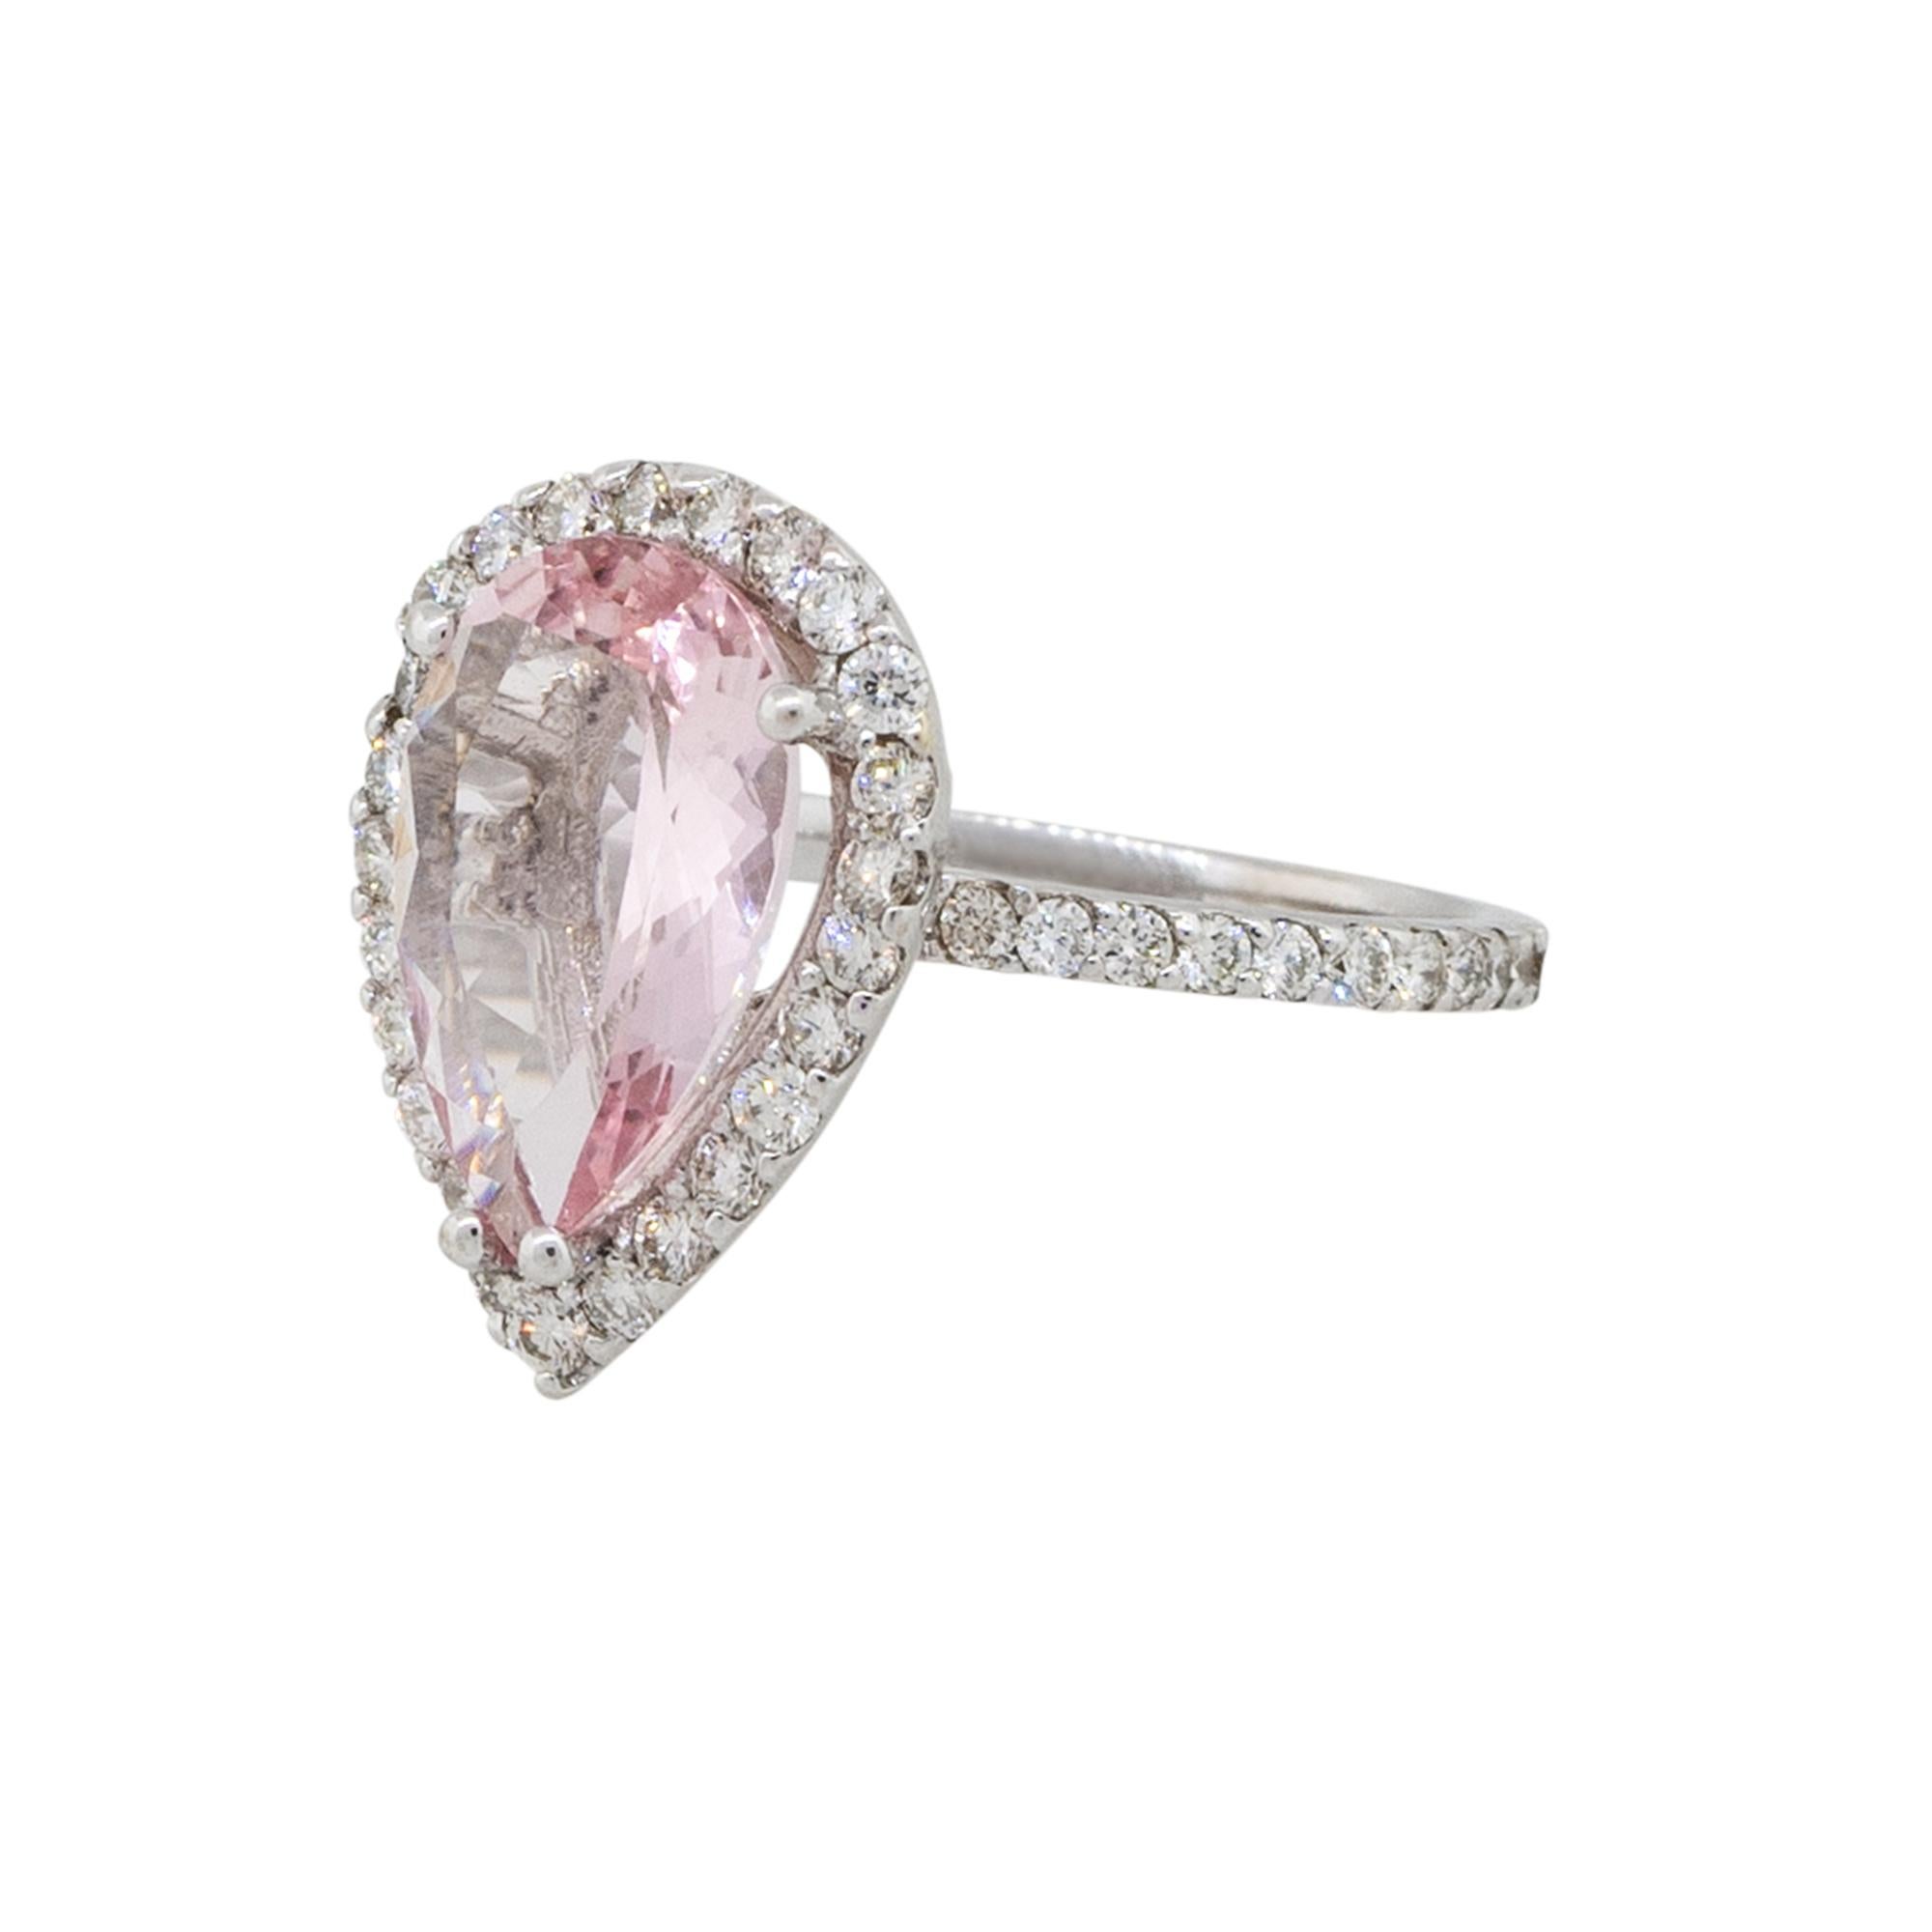 Material: 18k White Gold
Diamond Details: Approx. 0.92ctw of round cut Diamonds. Diamonds are H in color and VS in clarity
Gemstone Details: Approx. 3.19ctw Pear shape Morganite gemstone
Size: 6.75
Total weight: 4.8g (3.1dwt) 
Measurements: 0.75